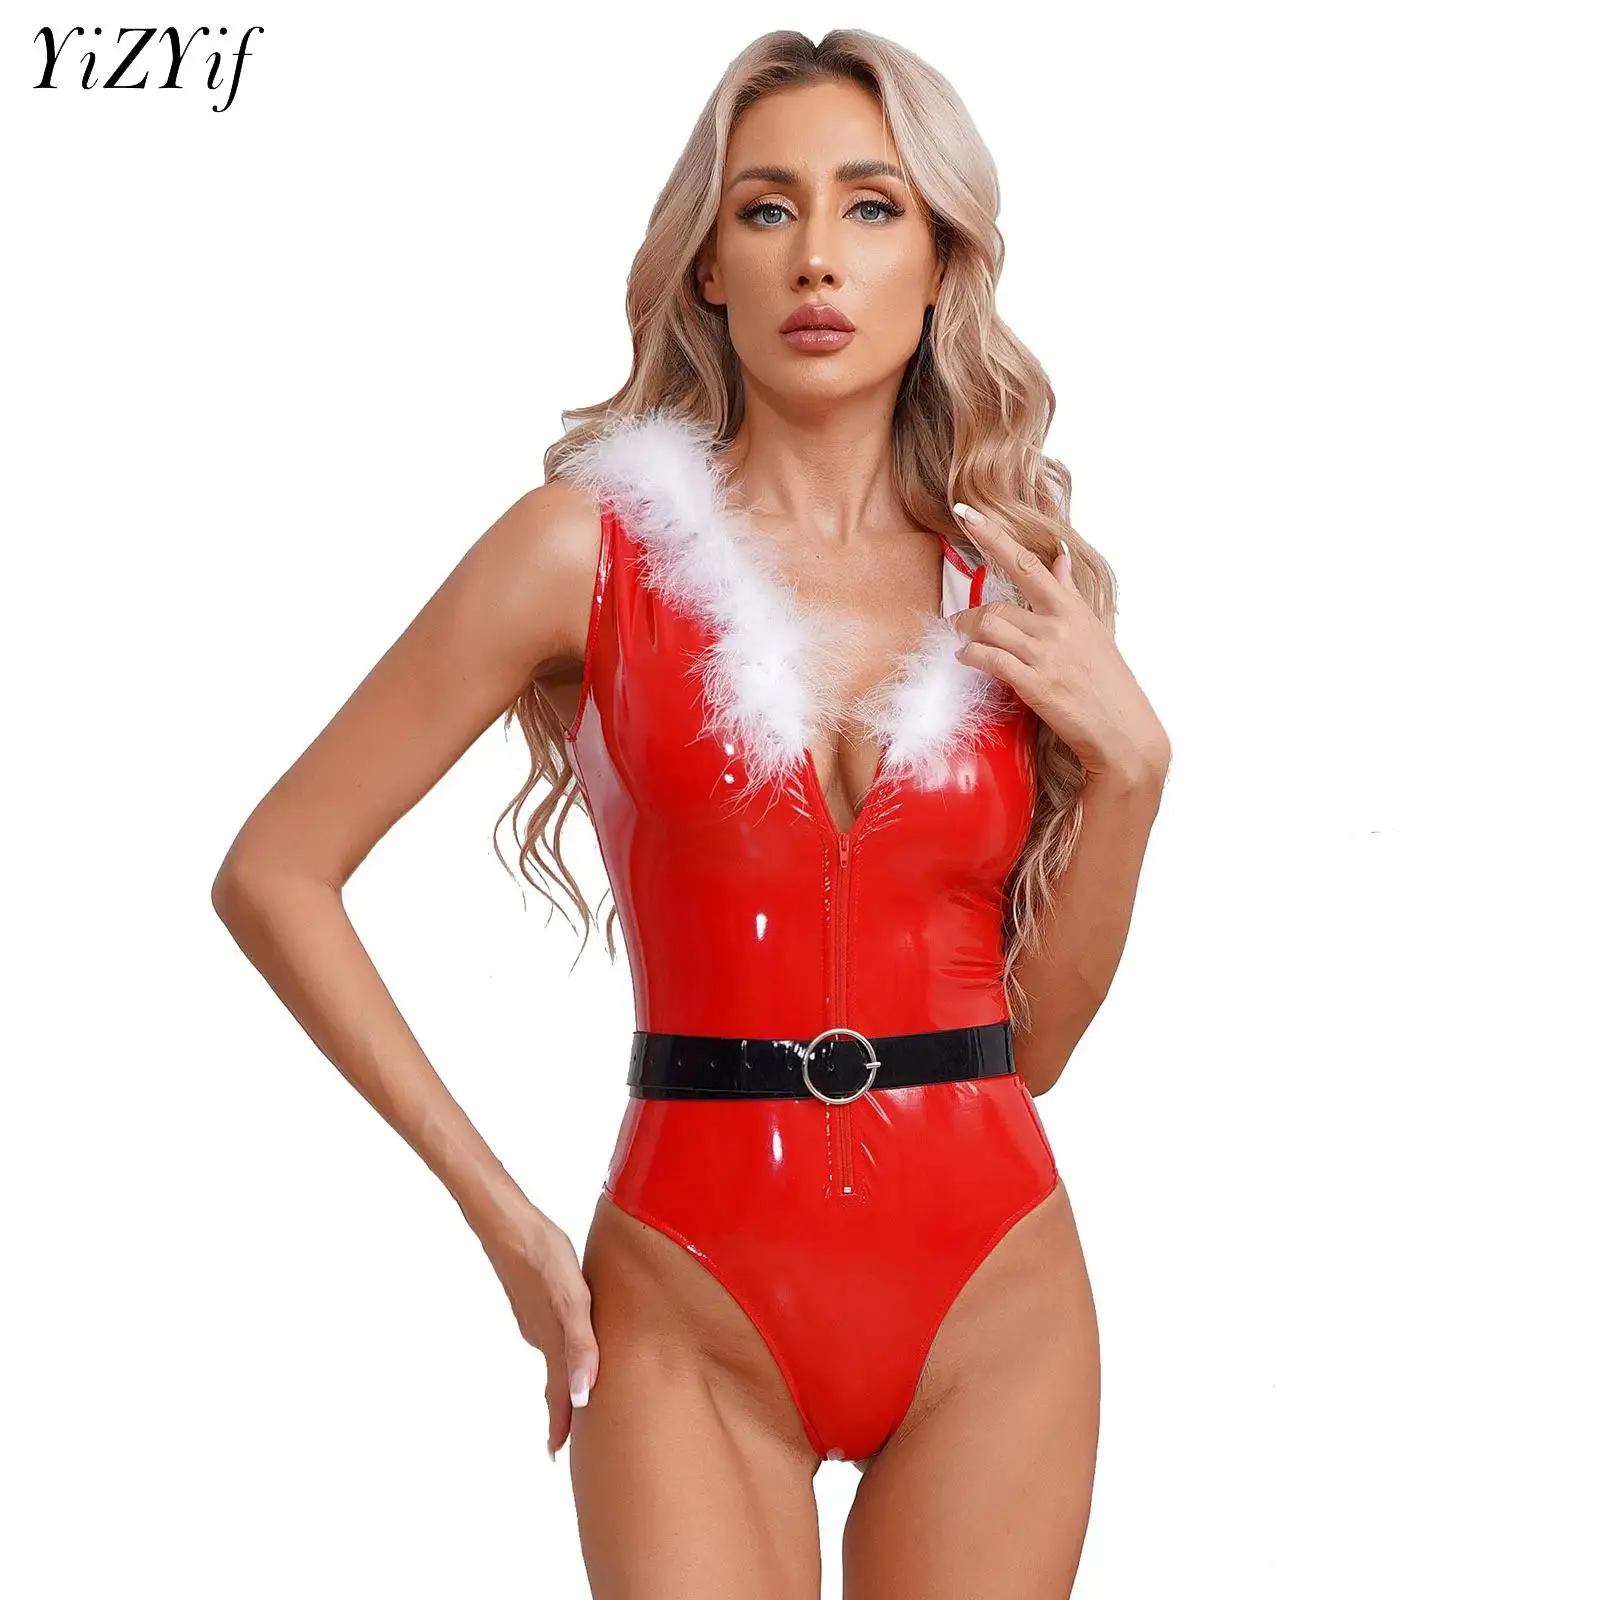 

Women Xmas Santa Claus Christmas Costume Sexy Hot Hooded Bodysuit with Belt Feather Trim Patent Leather Zipper Leotard Jumpsuit